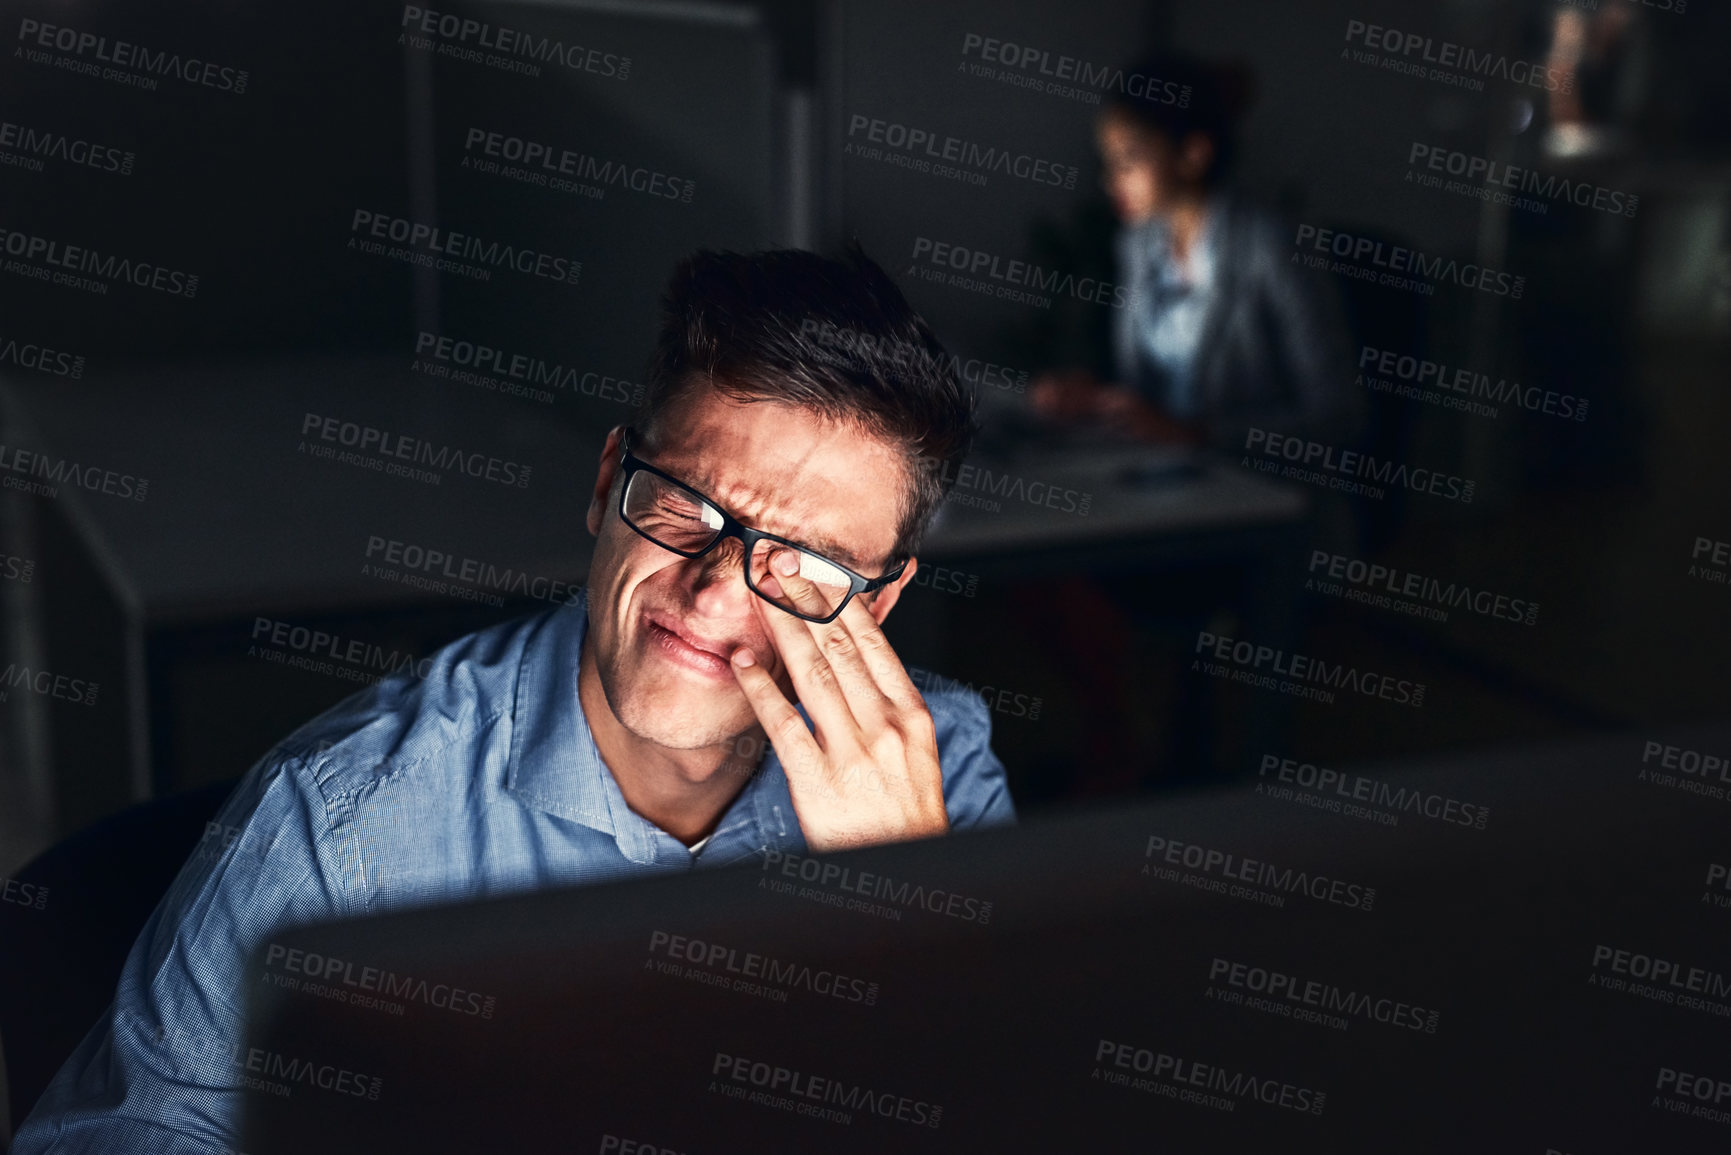 Buy stock photo Cropped shot of a young attractive businessman working late in the office